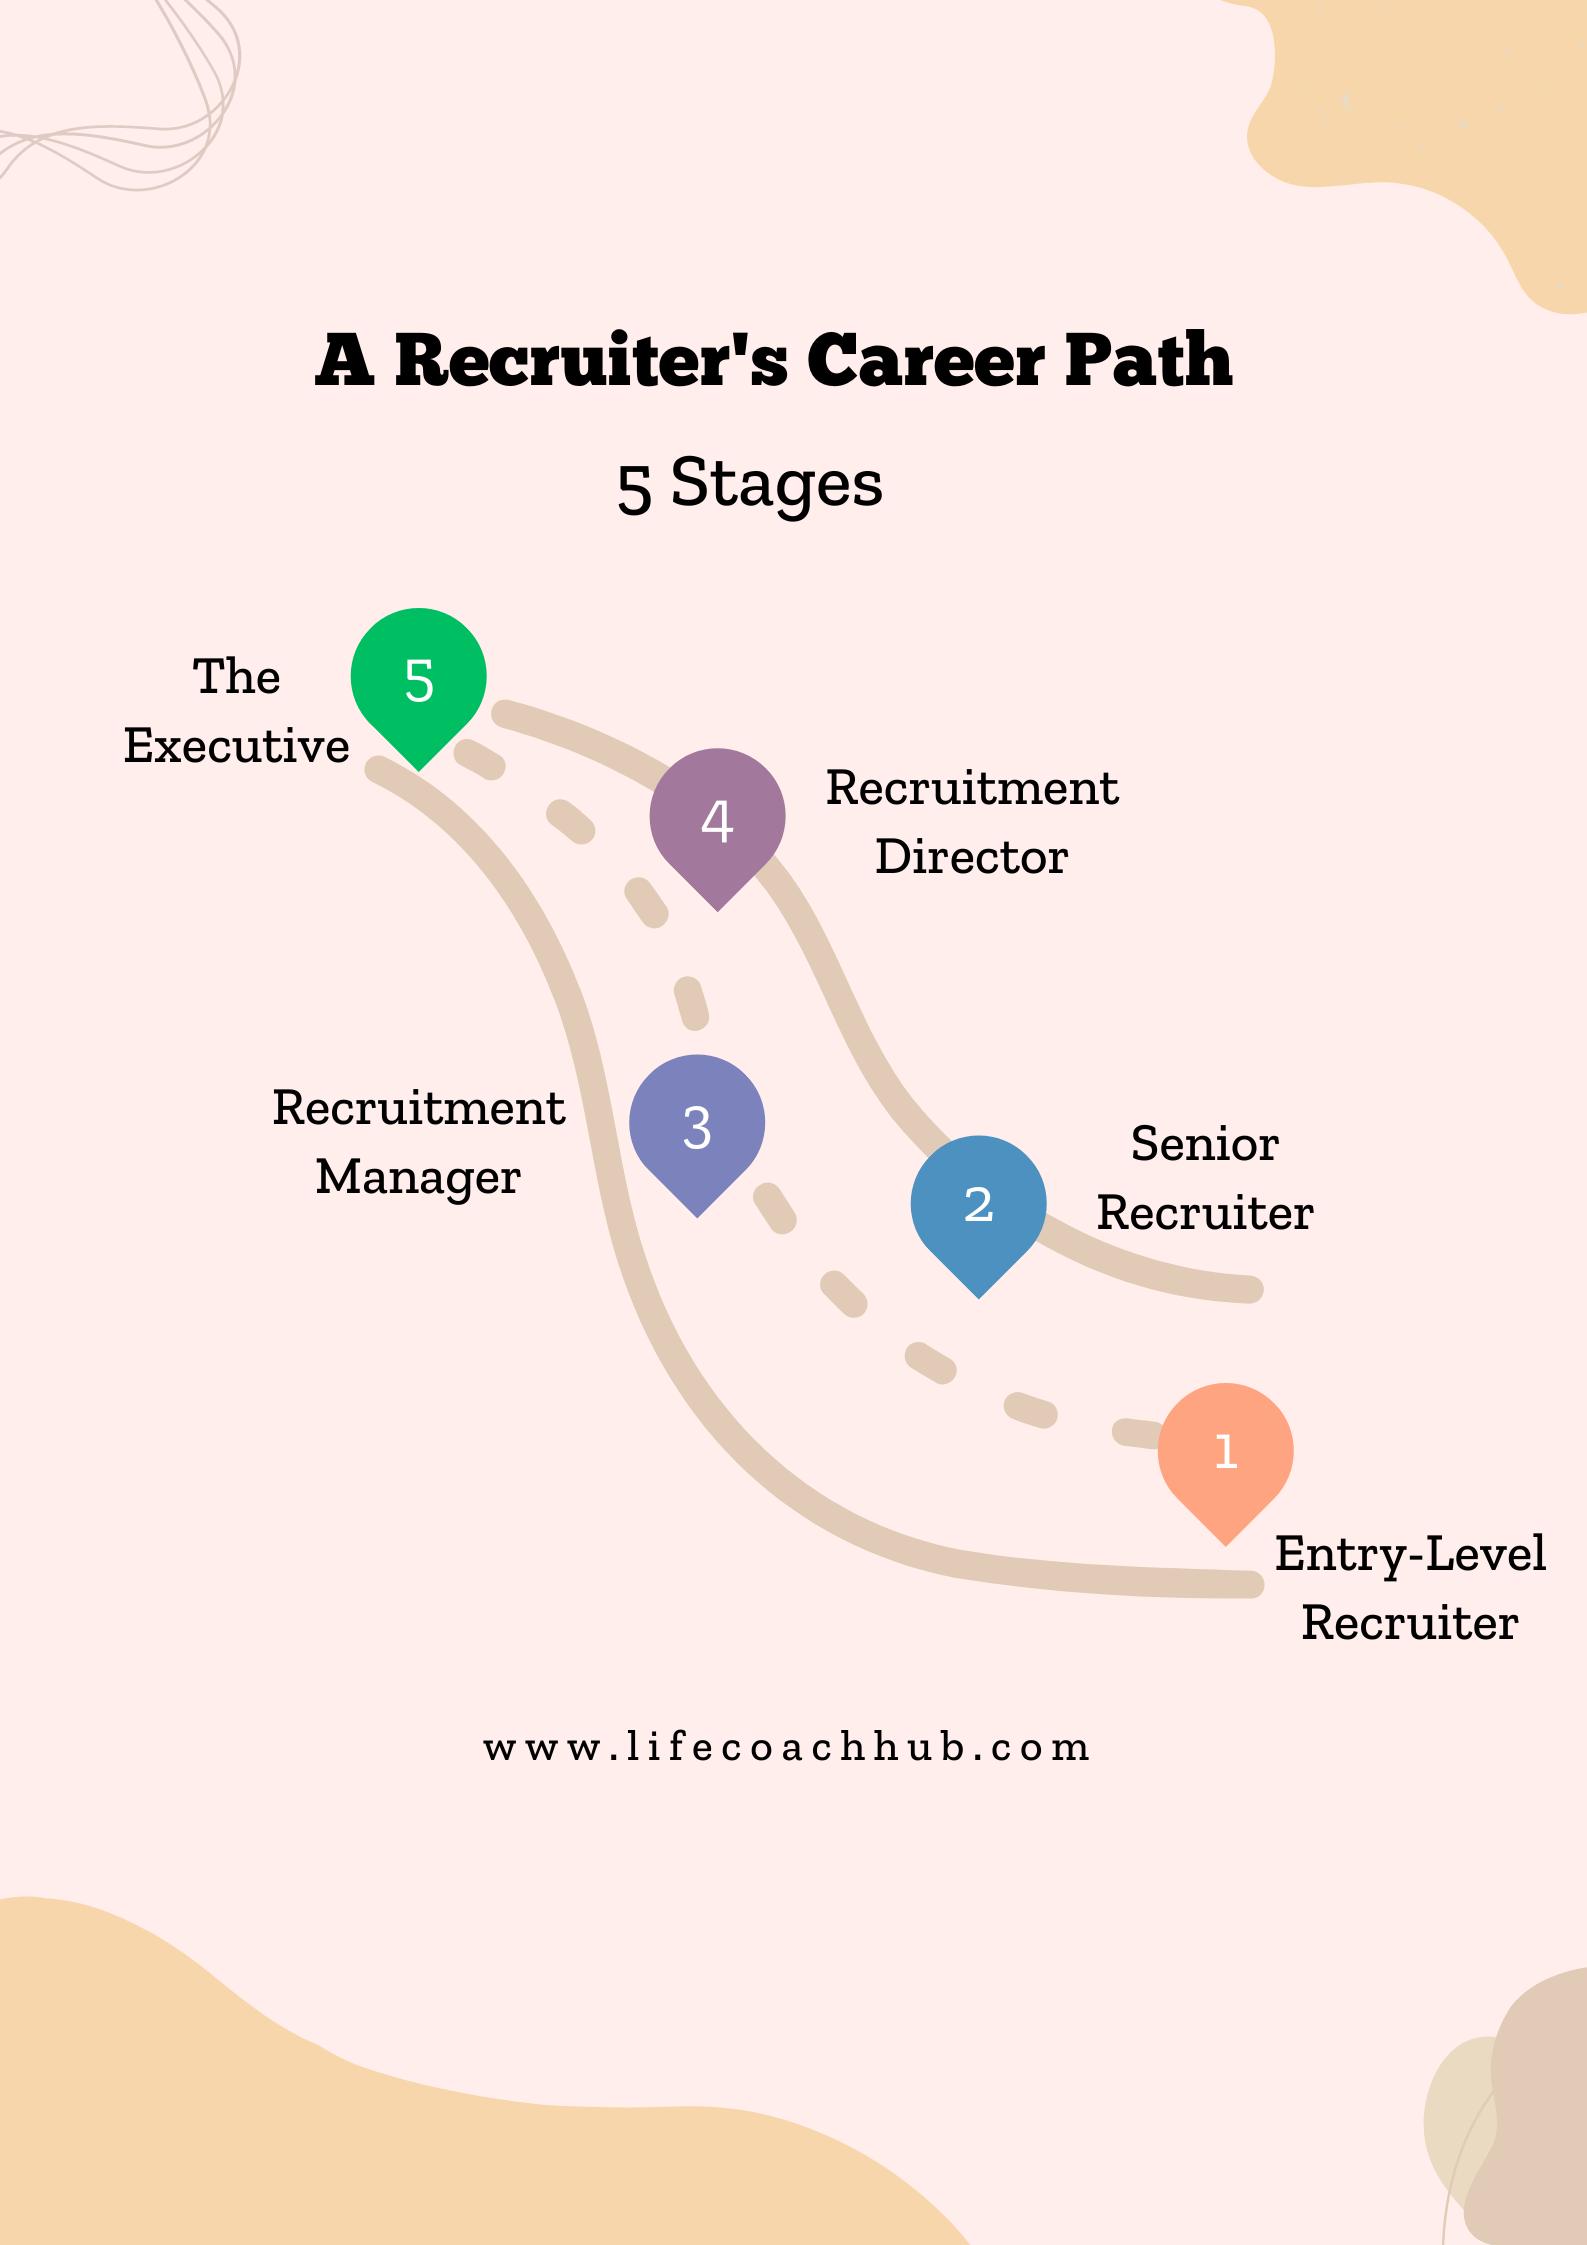 A Recruiter's Career Path: 5 Stages